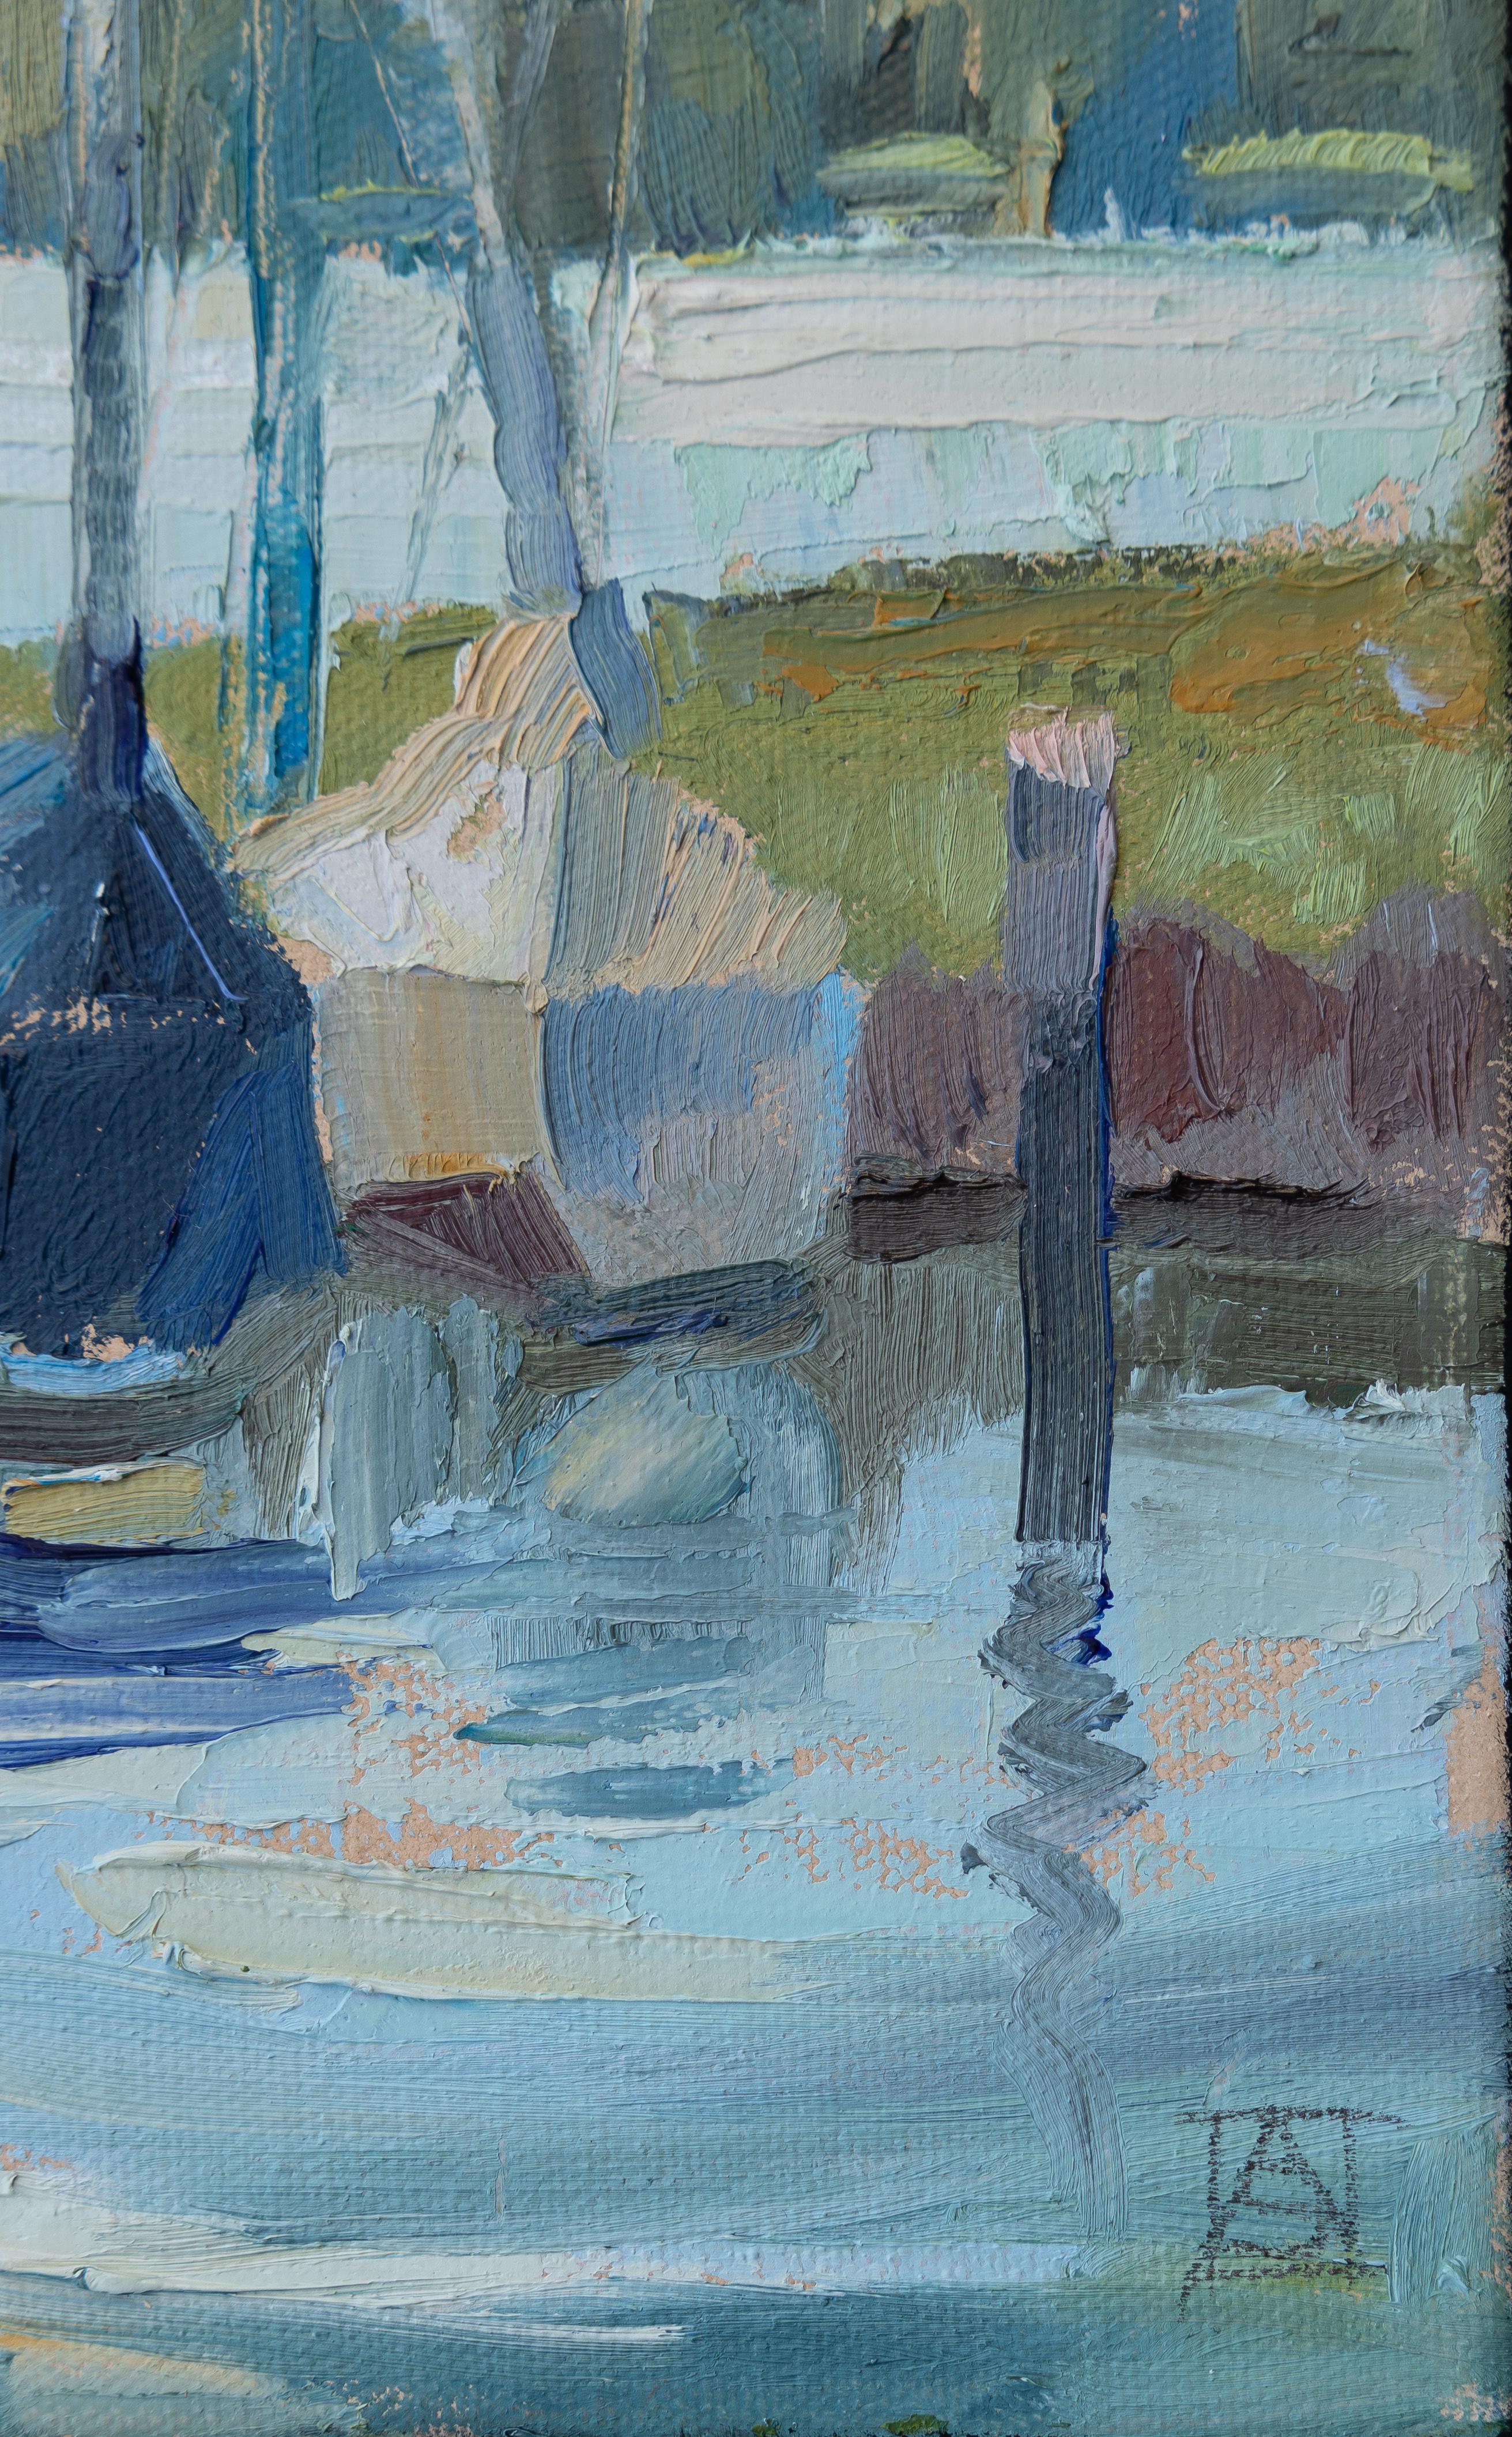 In my work with oil paints, I was guided by impressionism to capture the fleeting moods of water. Two majestic yachts stand still, their reflections dancing on the surface of the water, conveying a deep sense of calm. Every brush stroke is made with